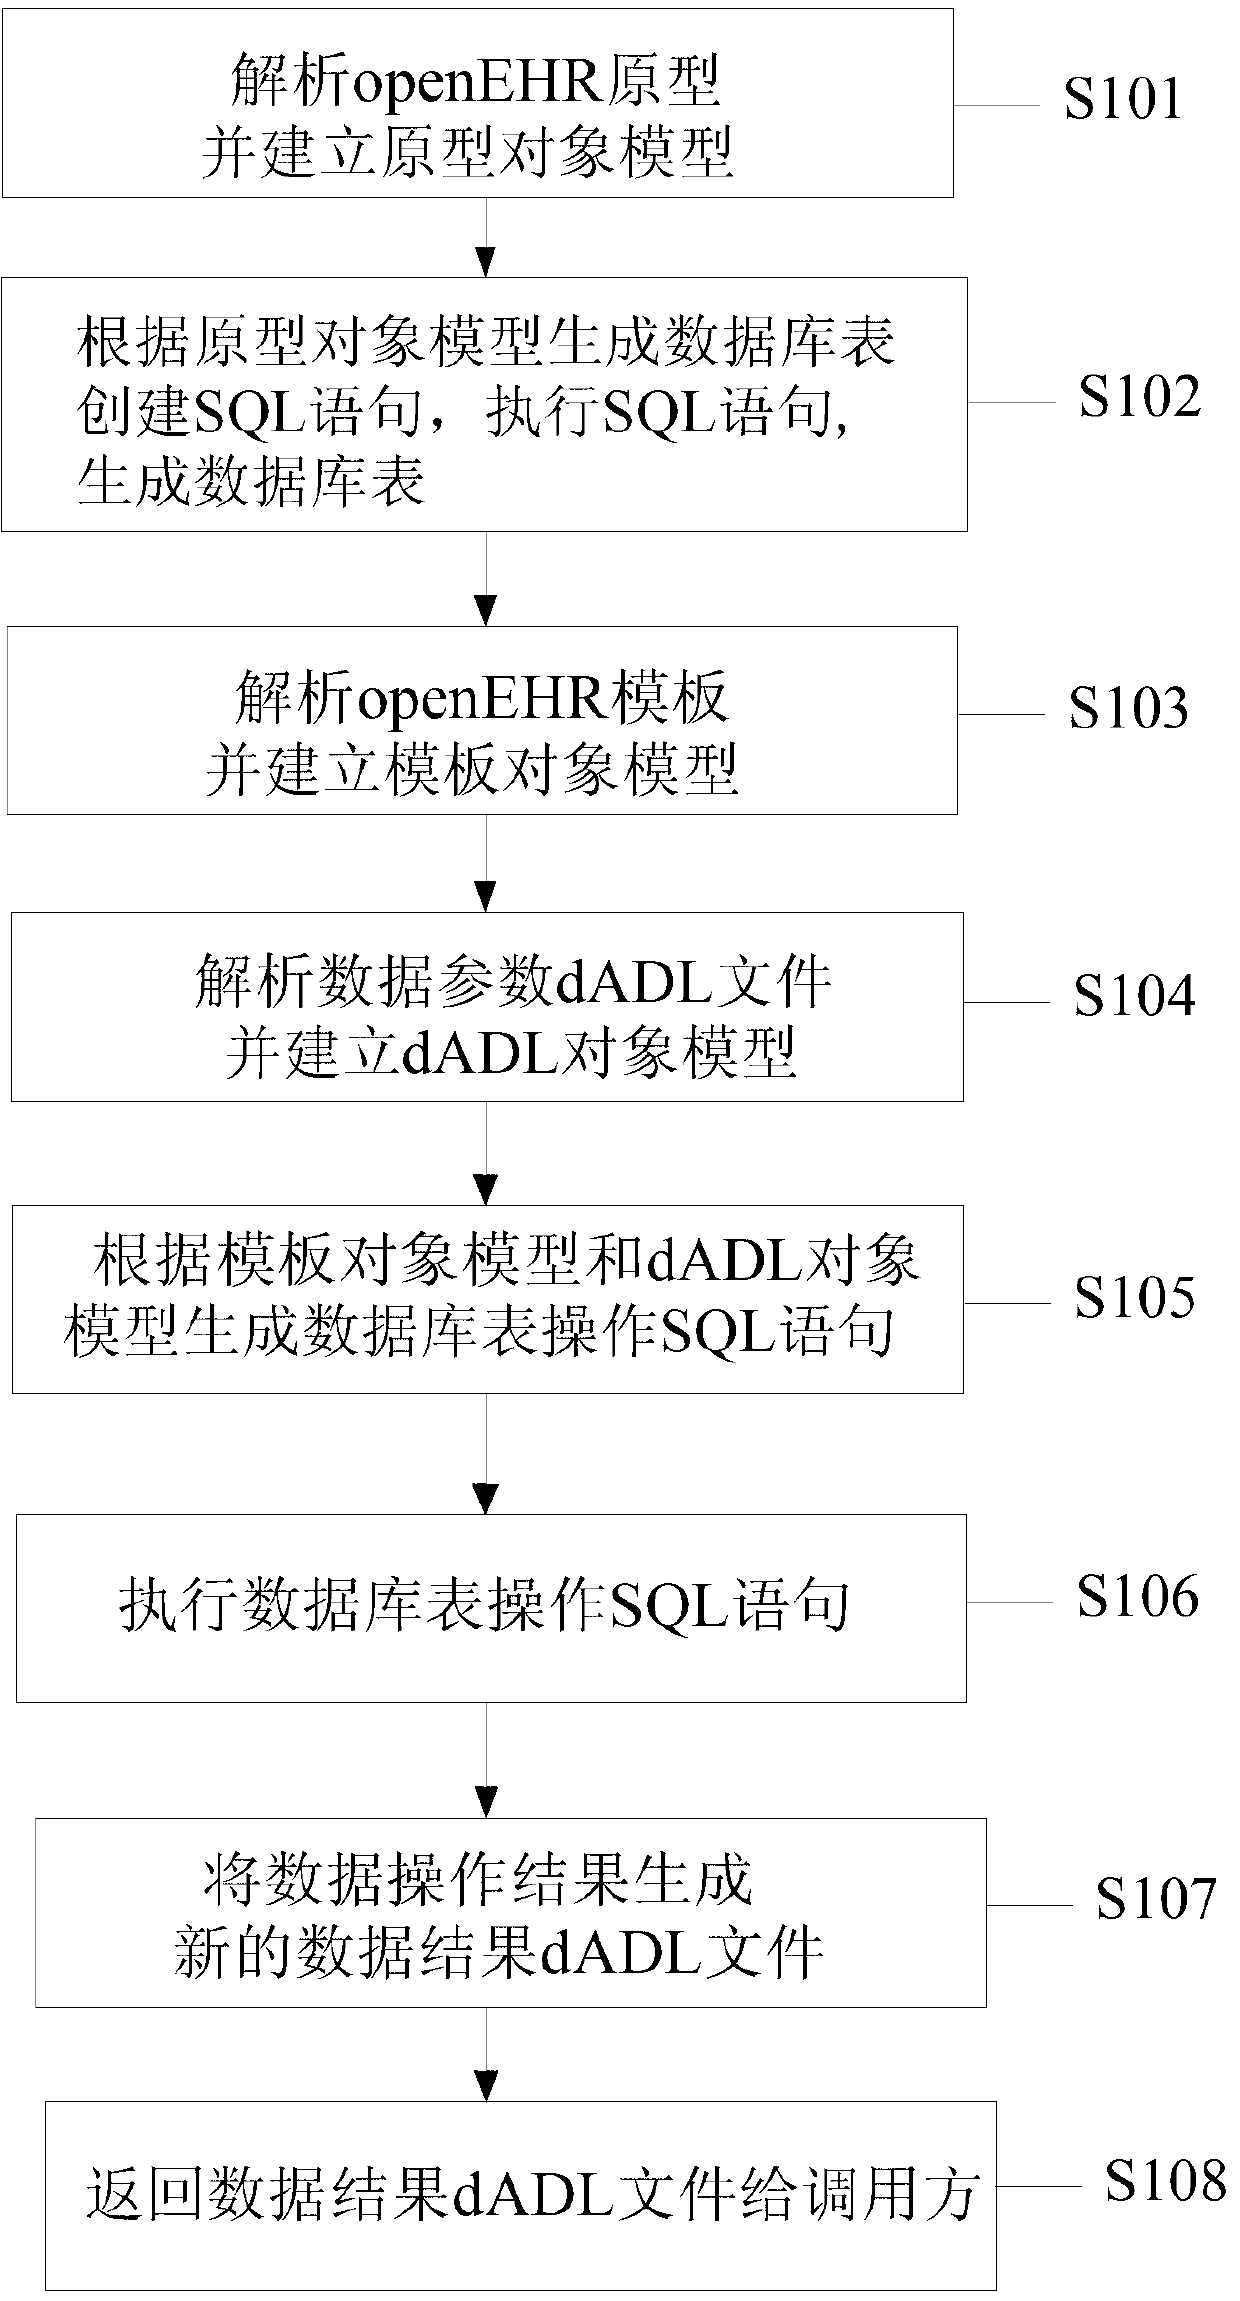 Method for converting openEHR information into relational database